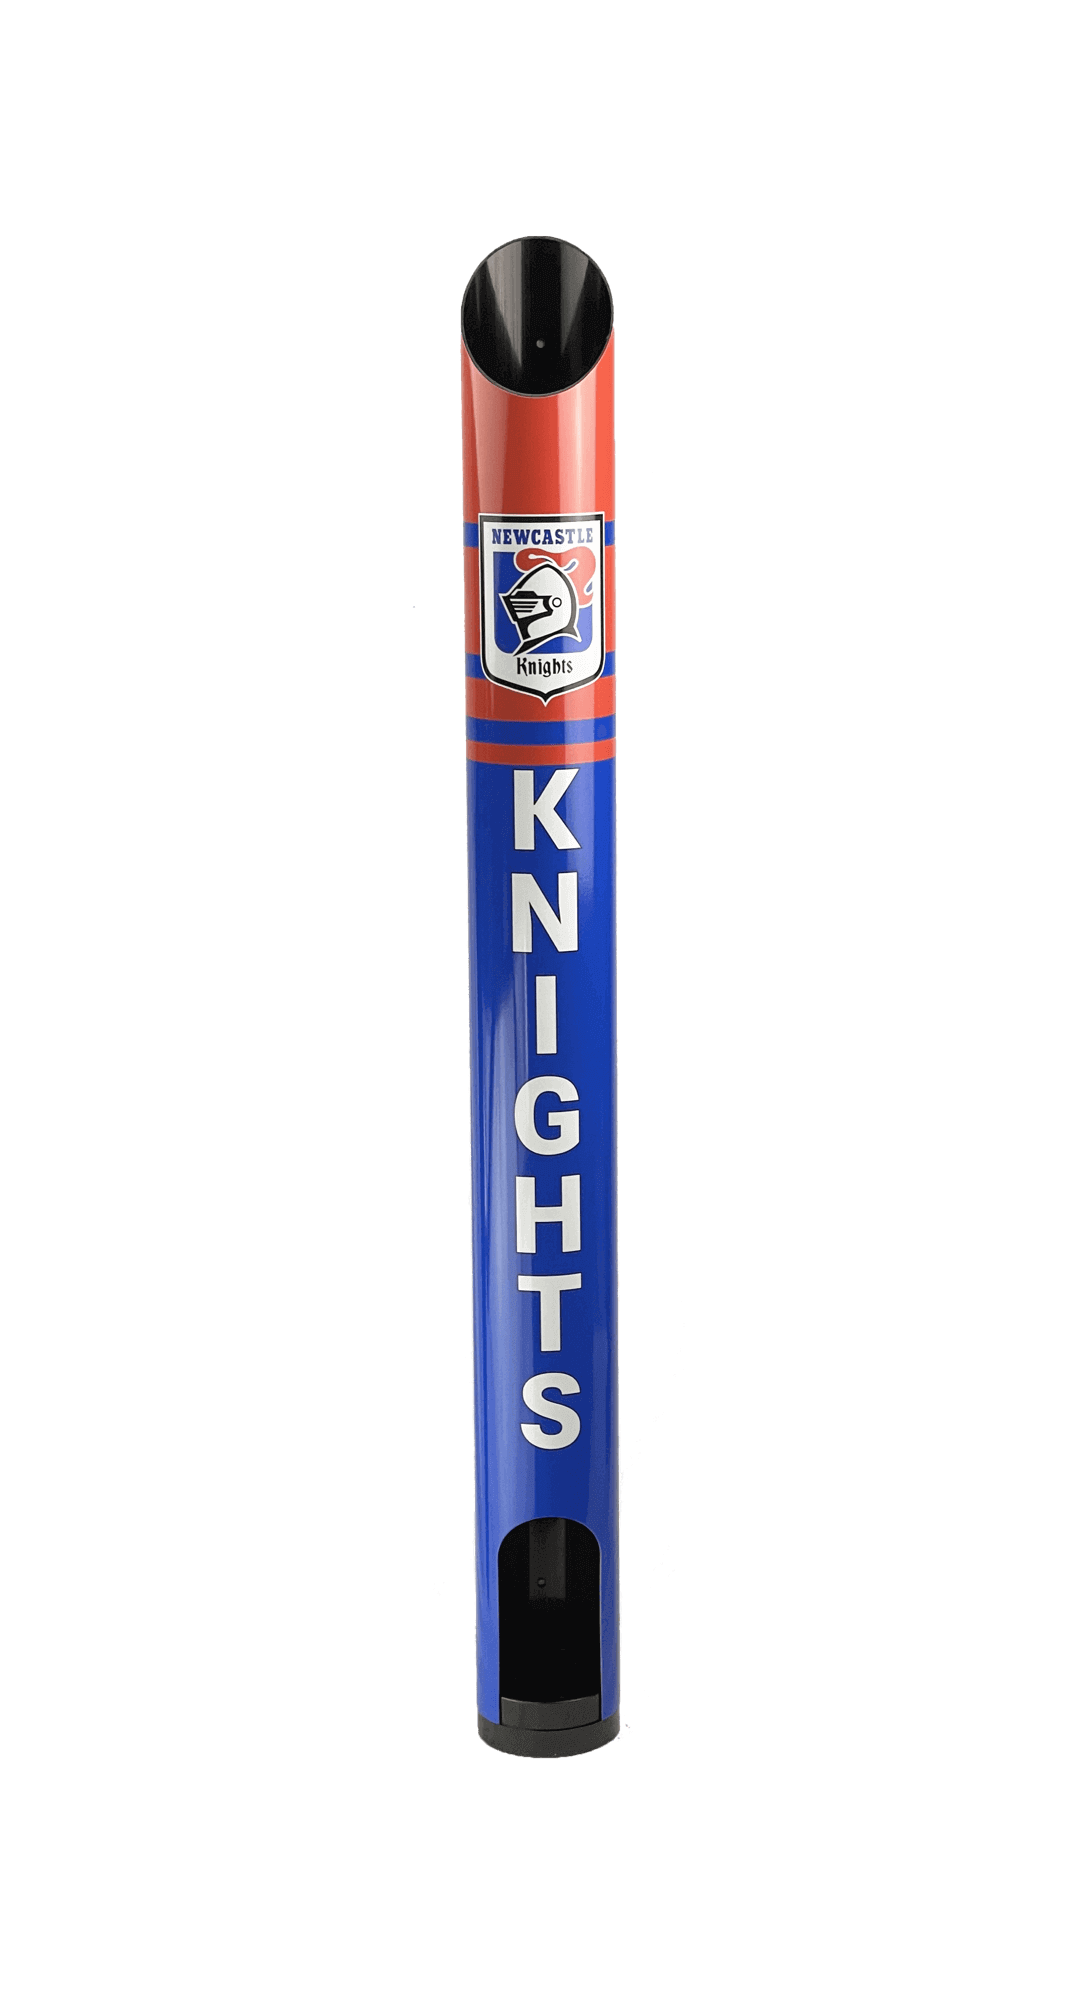 PERSONALISED NEW CASTLE KNIGHTS NRL STUBBY HOLDER DISPENSER_NEWCASTLE KNIGHTS_STUBBY CLUB